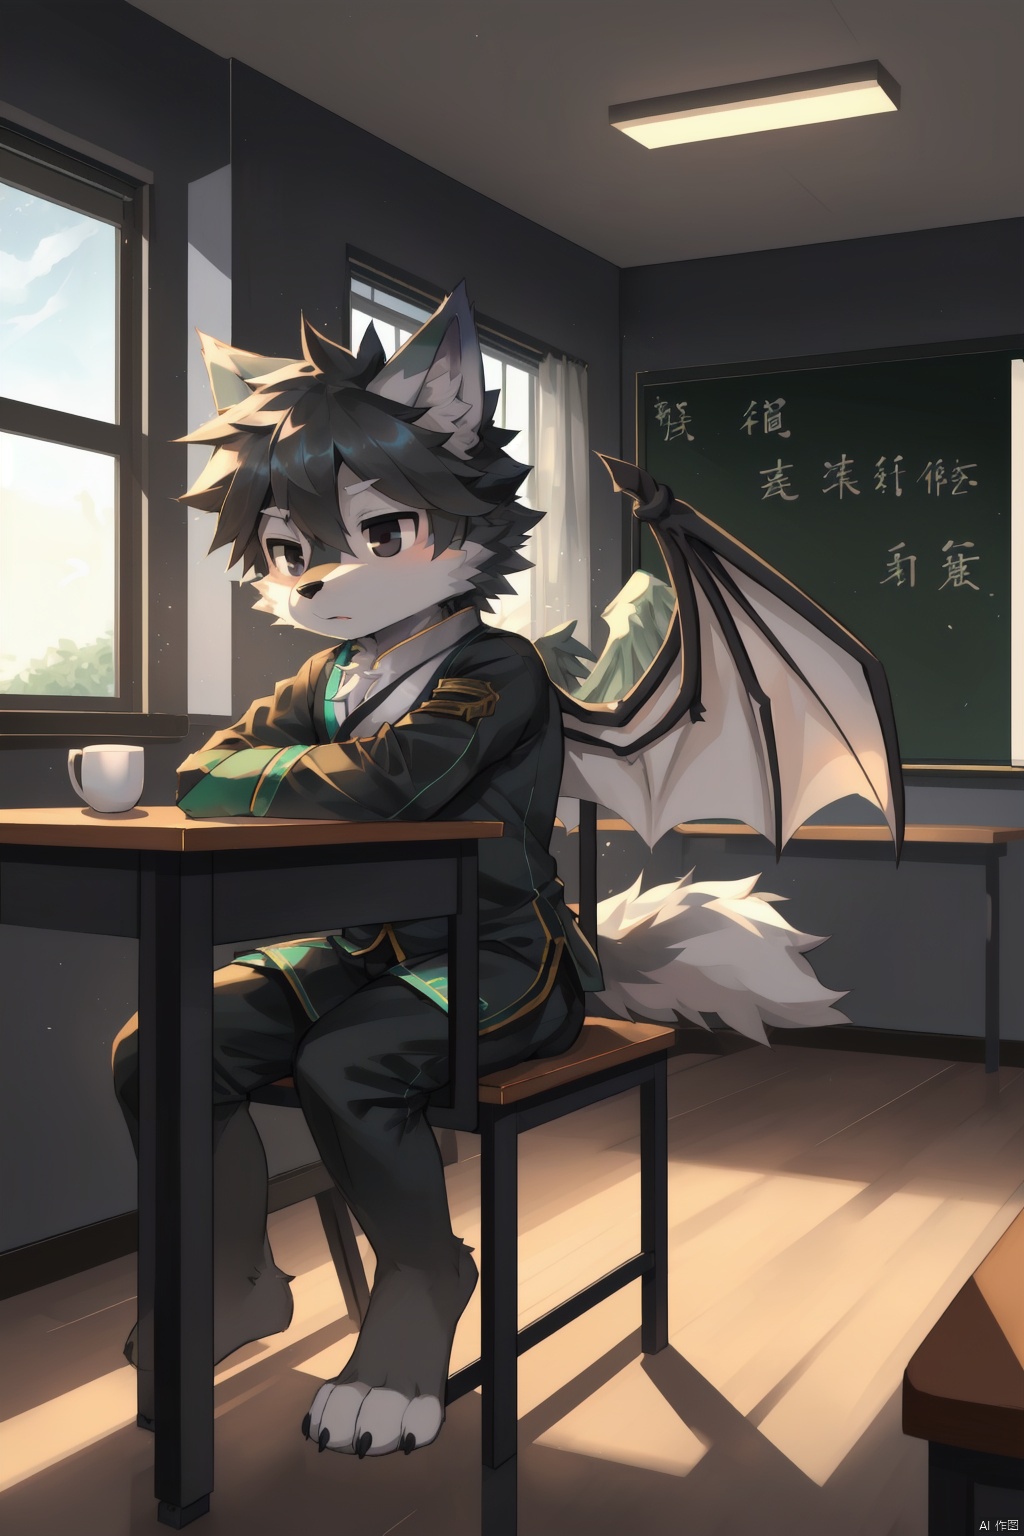  Furry,Cute wolf,young ,child,shota ,gray and black fur,black eyes,sit on the chair,alone,in the classroom., (\shen ming shao nv\),wings, furry